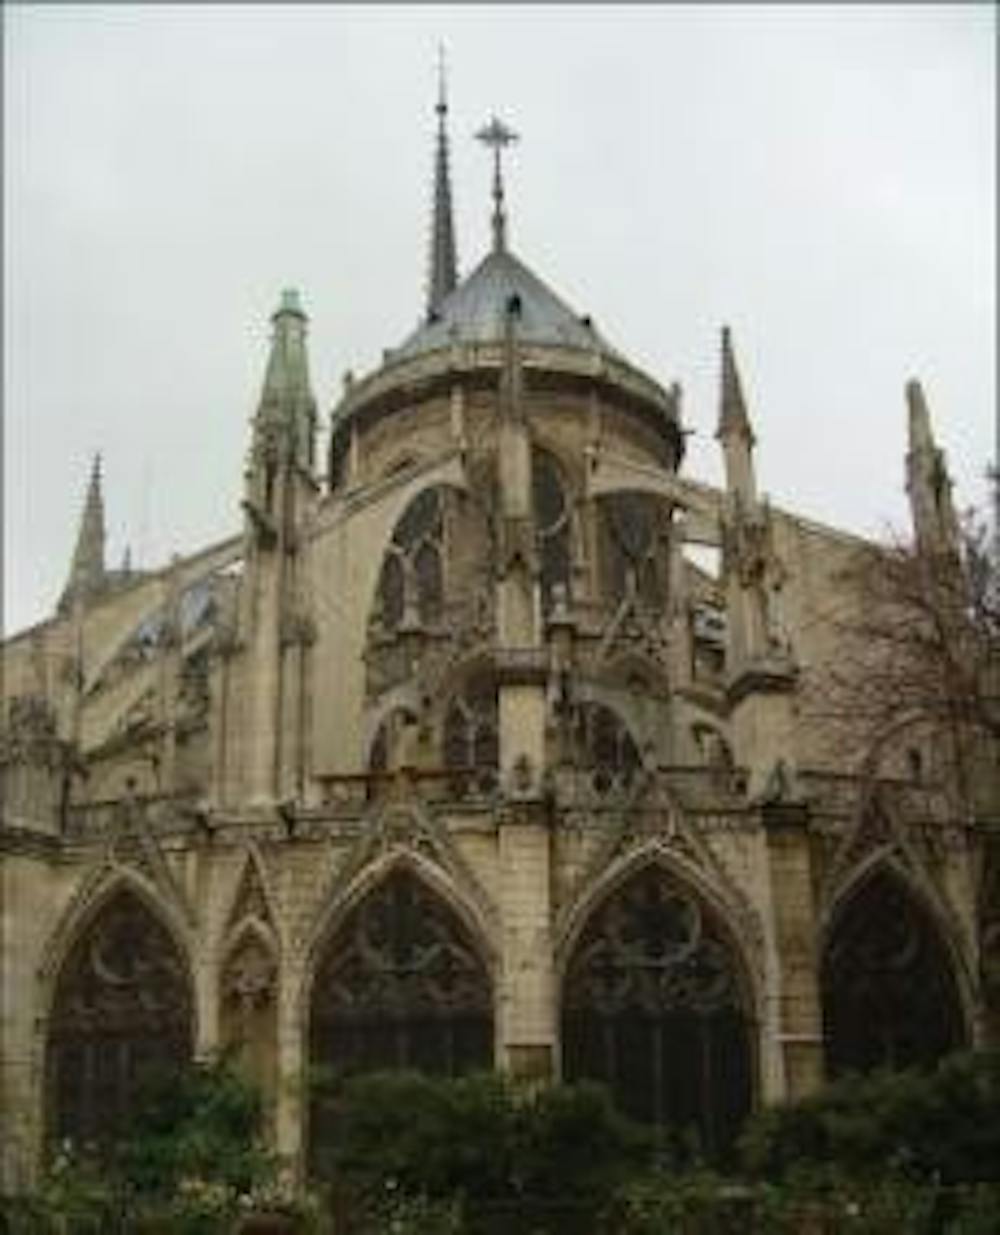 Students can travel and visit tourist spots in Paris, such as the Notre Dame Cathedral (above), during the program's four-day weekends.